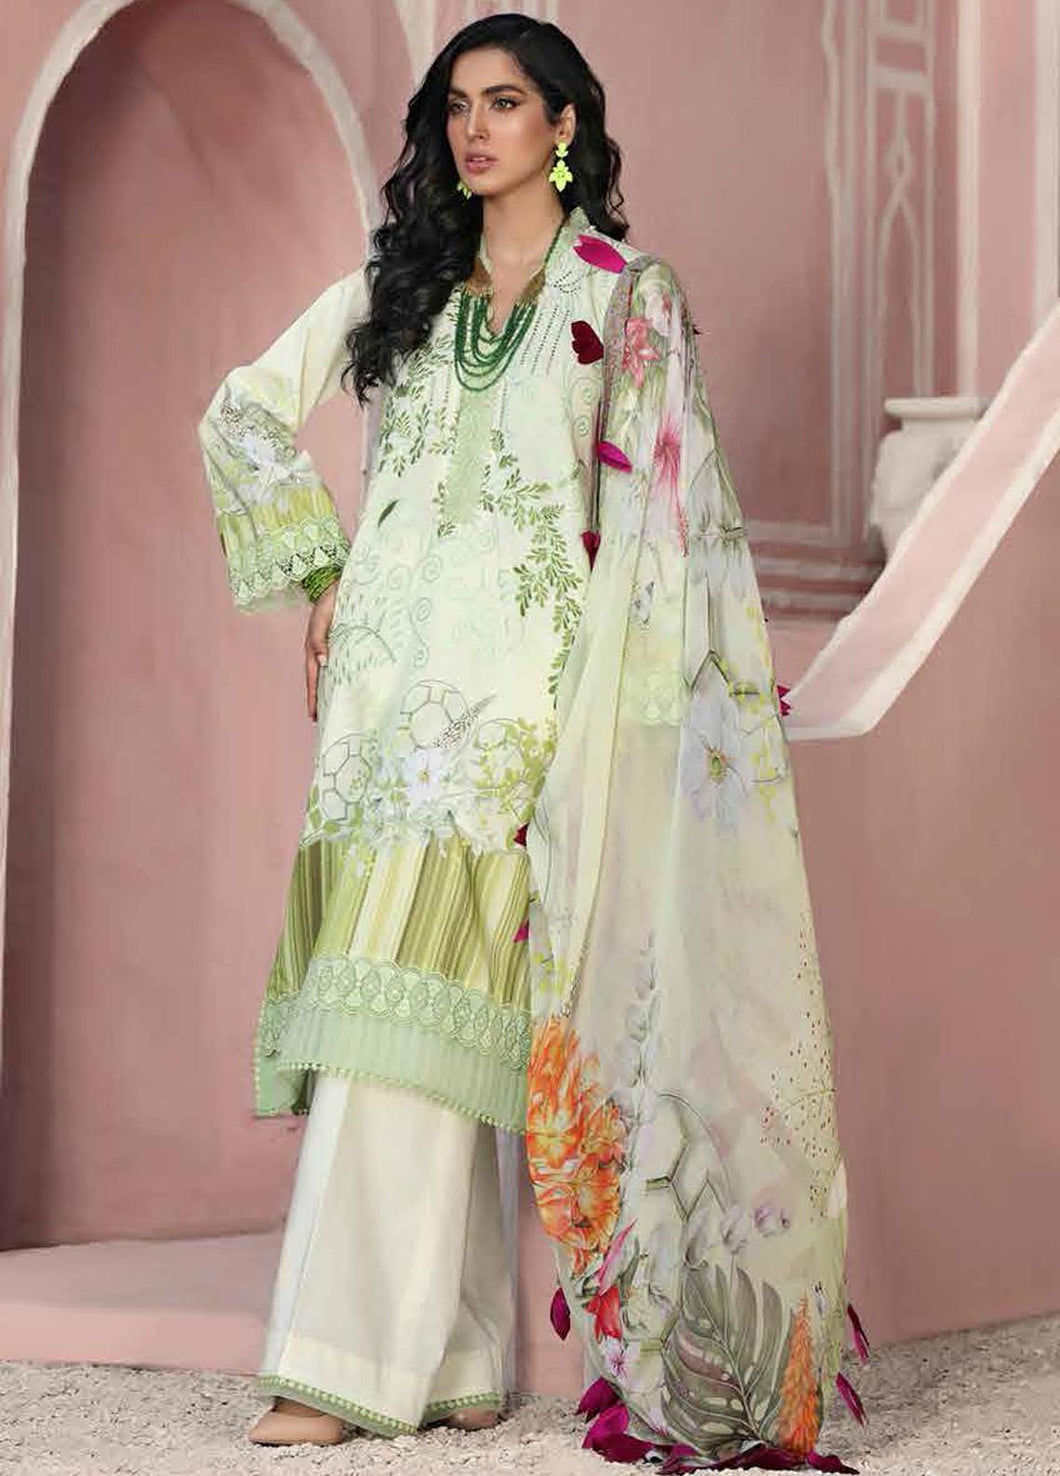 Buy Roheenaz Summer Collection 2021 2B Green Lawn dress from our official website. We have wide range of PAKISTANI DESIGNER DRESSES ONLINE with stitching facilities. These summer days get your dress as like PAKISTANI BOUTIQUE DRESSES. We have Brands such as MARIA B ASIM JOFA Get your dress in UK, USA from Lebaasonline